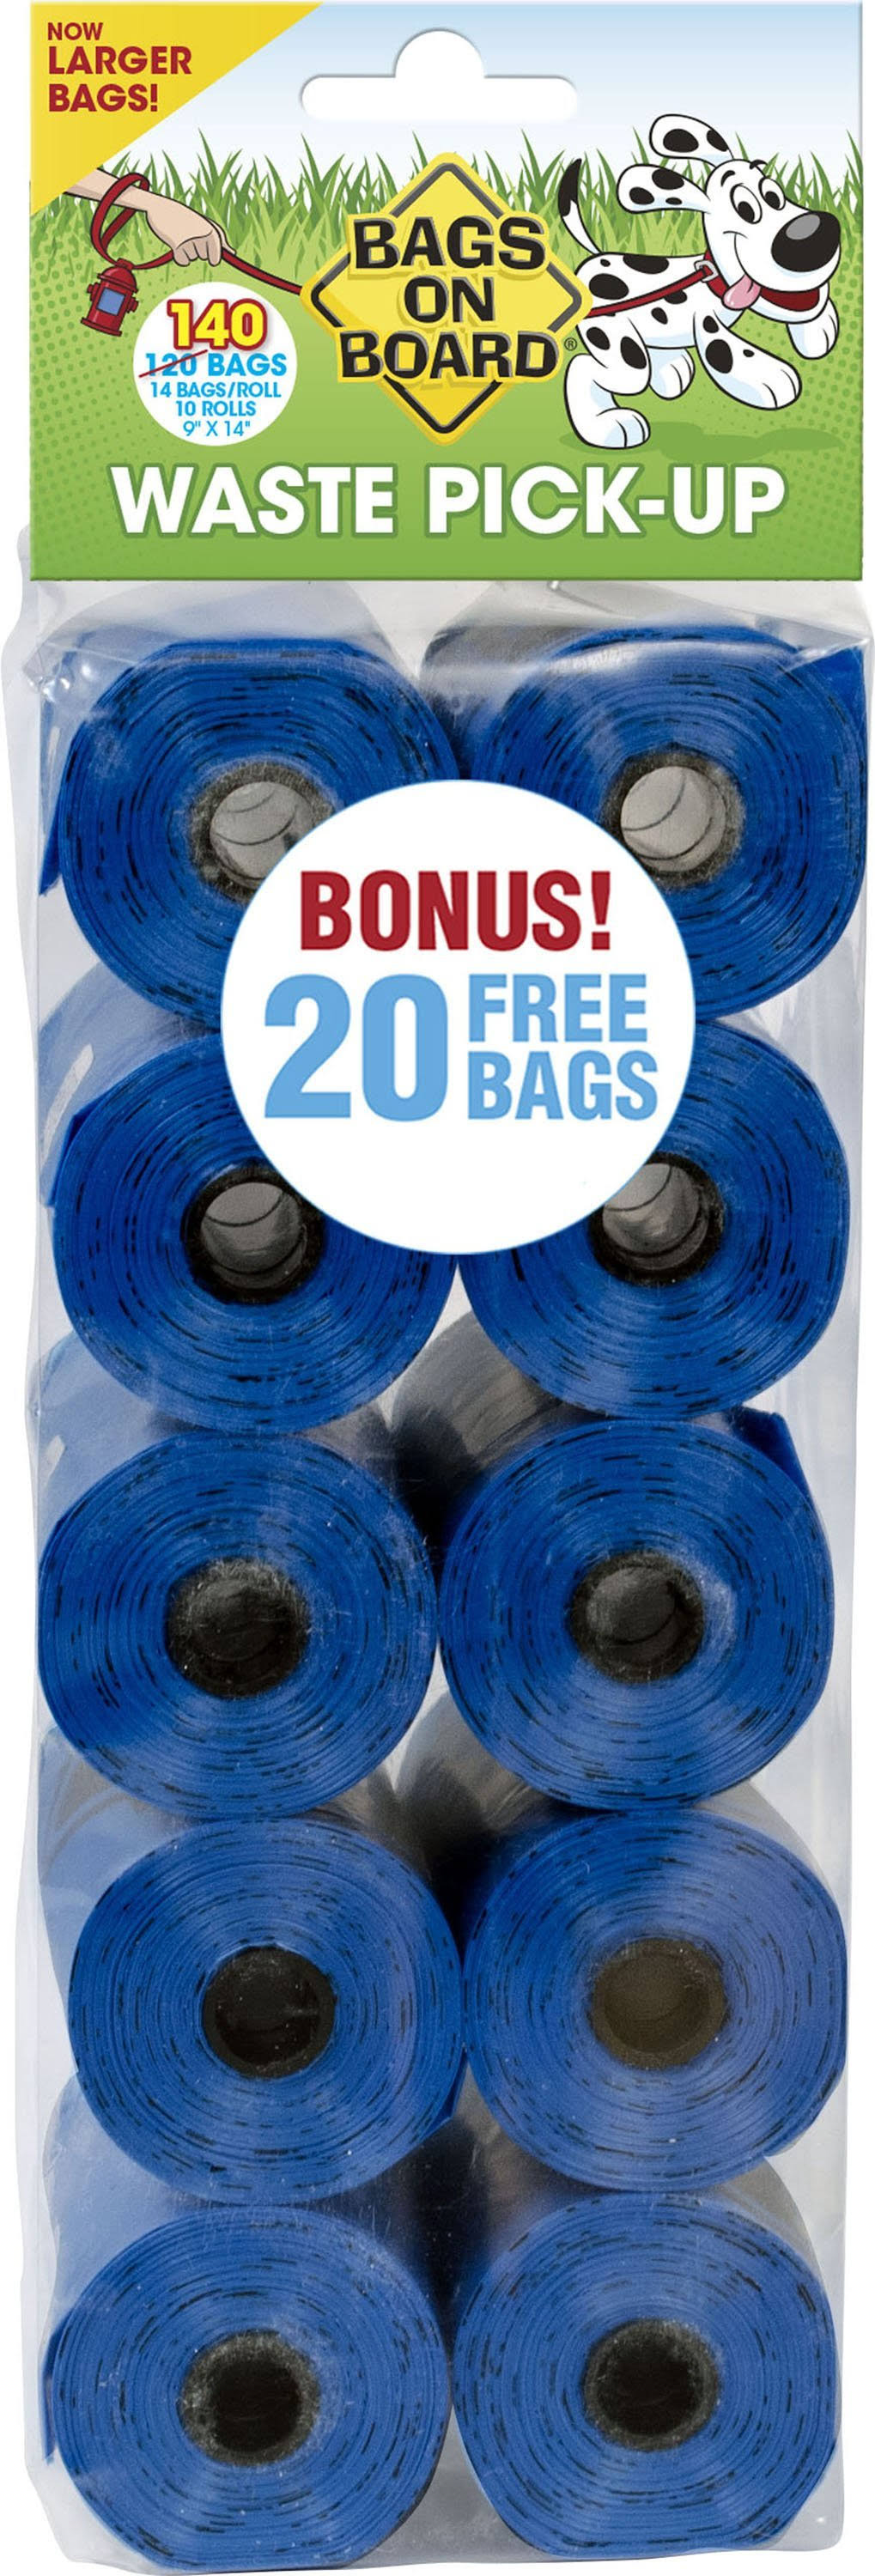 Bags on Board Bag Refill Pack - Blue, 140 Count